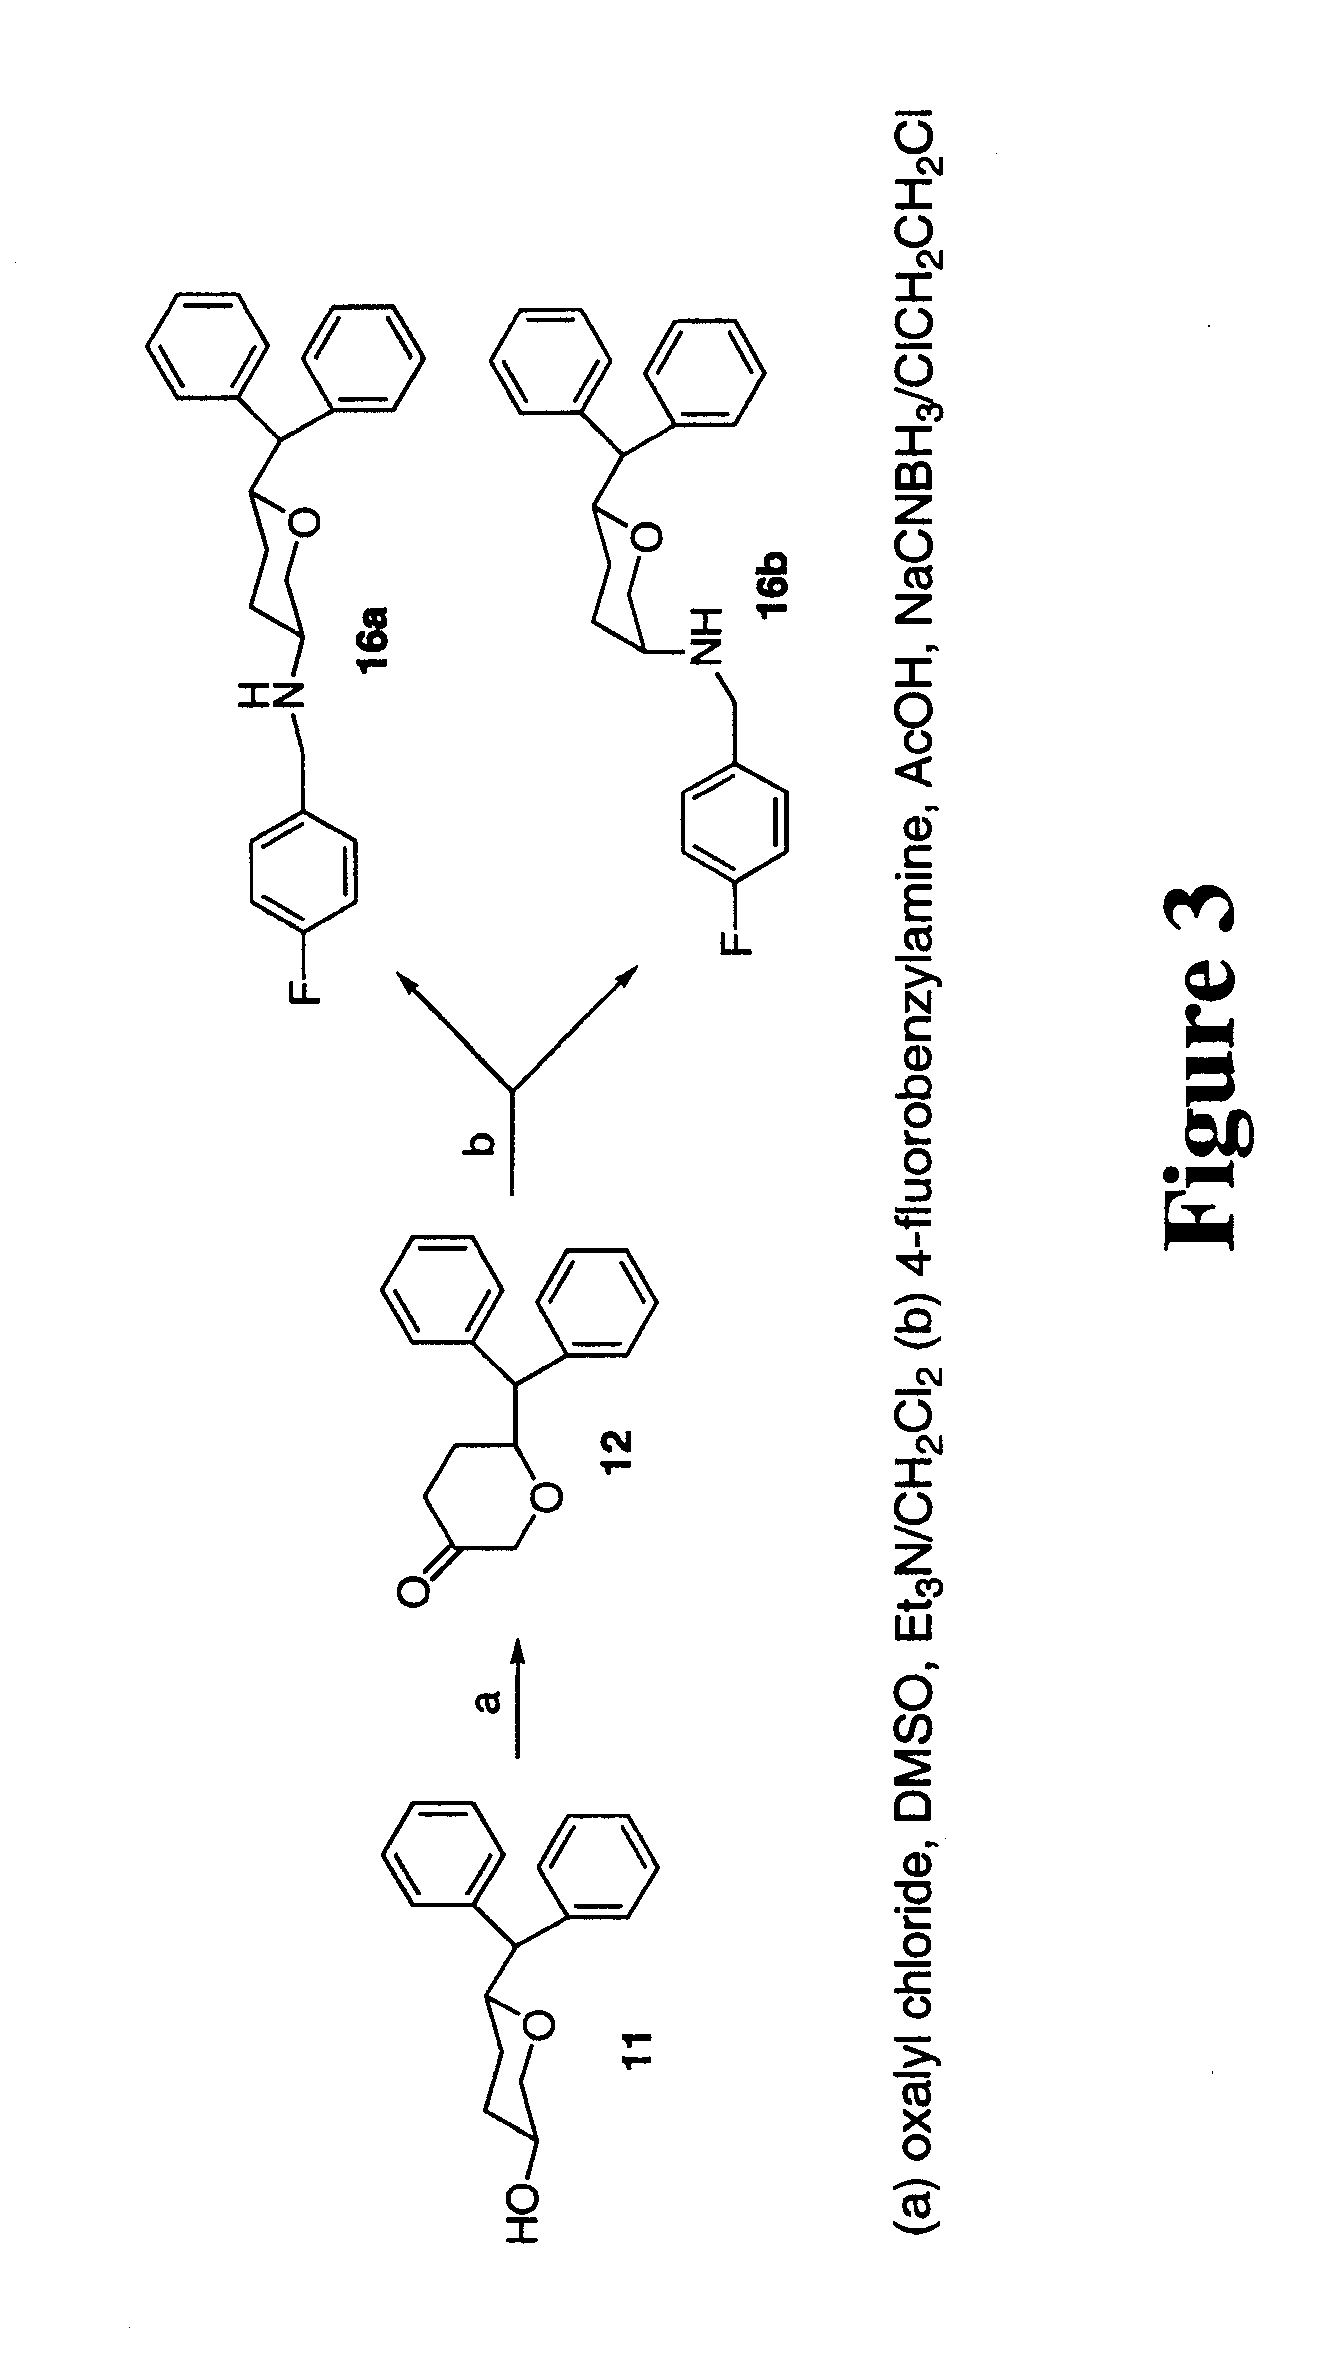 Tri-substituted 2-benzhydryl-5-benzylamino-tetrahydro-pyran-4-ol and 6-benzhydryl-4-benzylamino-tetrahydro-pyran-3-ol analogues, and novel, 3,6-disubstituted pyran derivatives